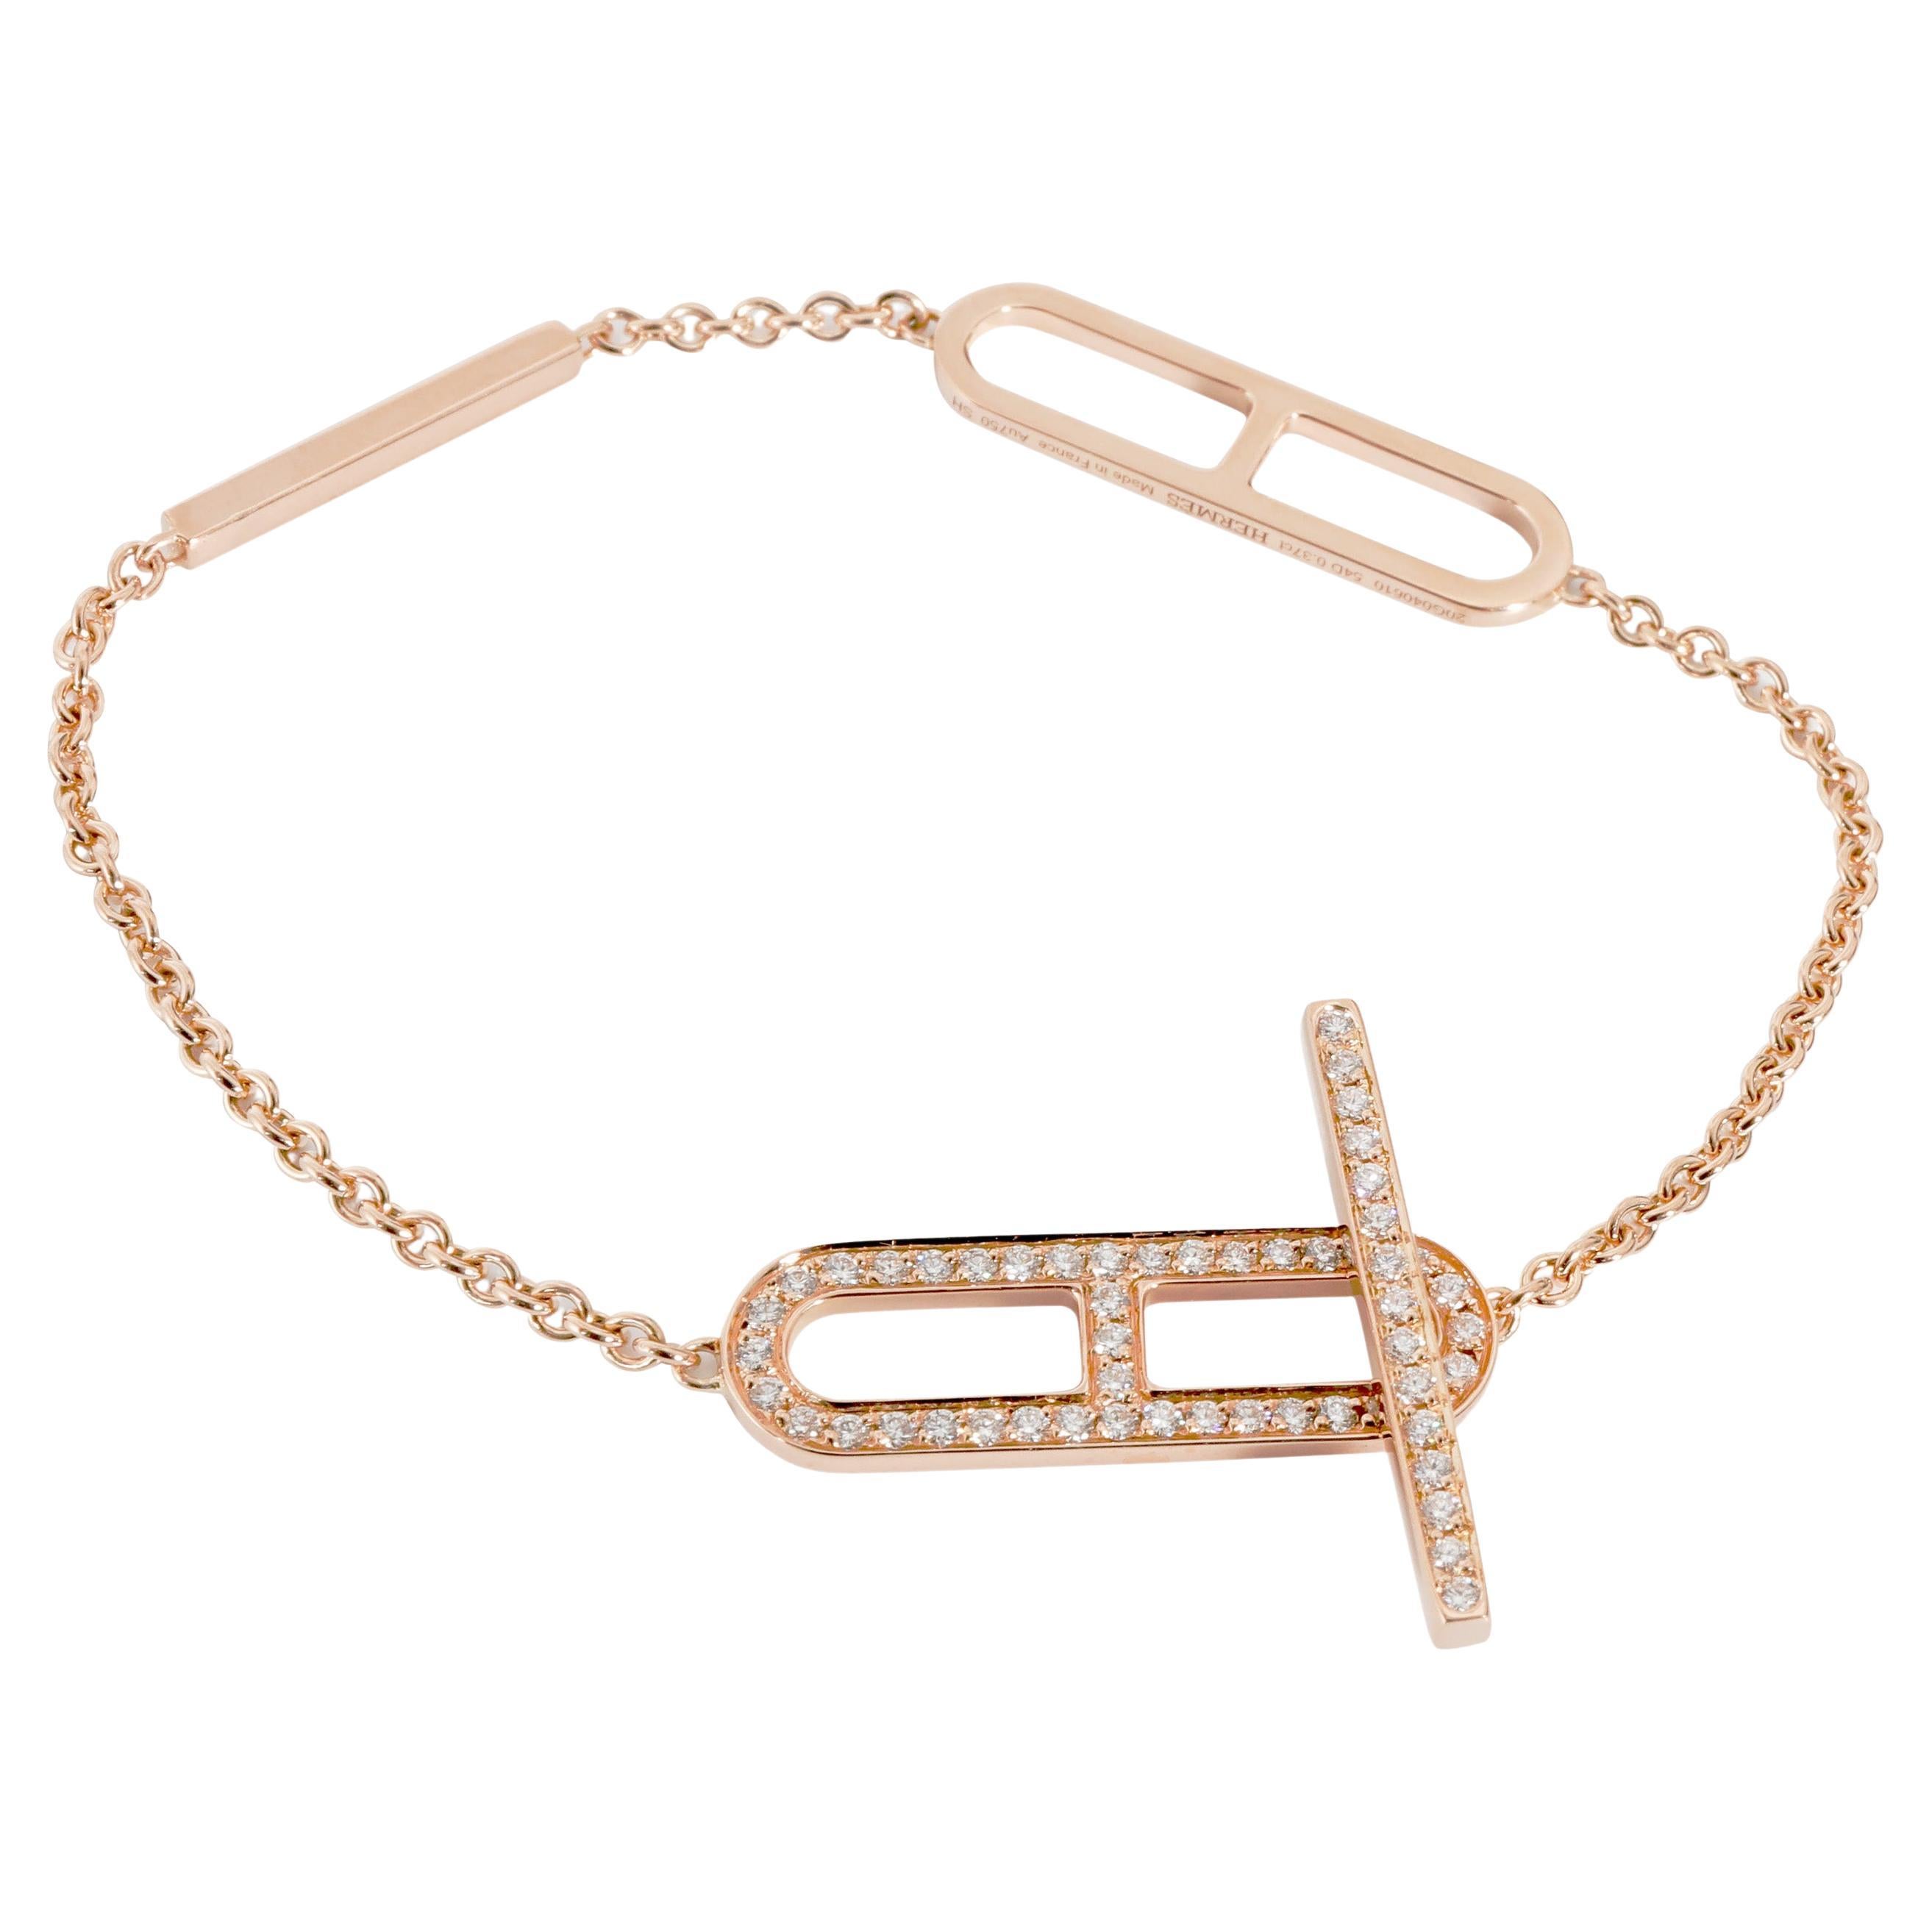 Hermes Ever Chaine D'Ancre Bracelet, Small Model in 18KT Rose Gold 0.37ctw For Sale